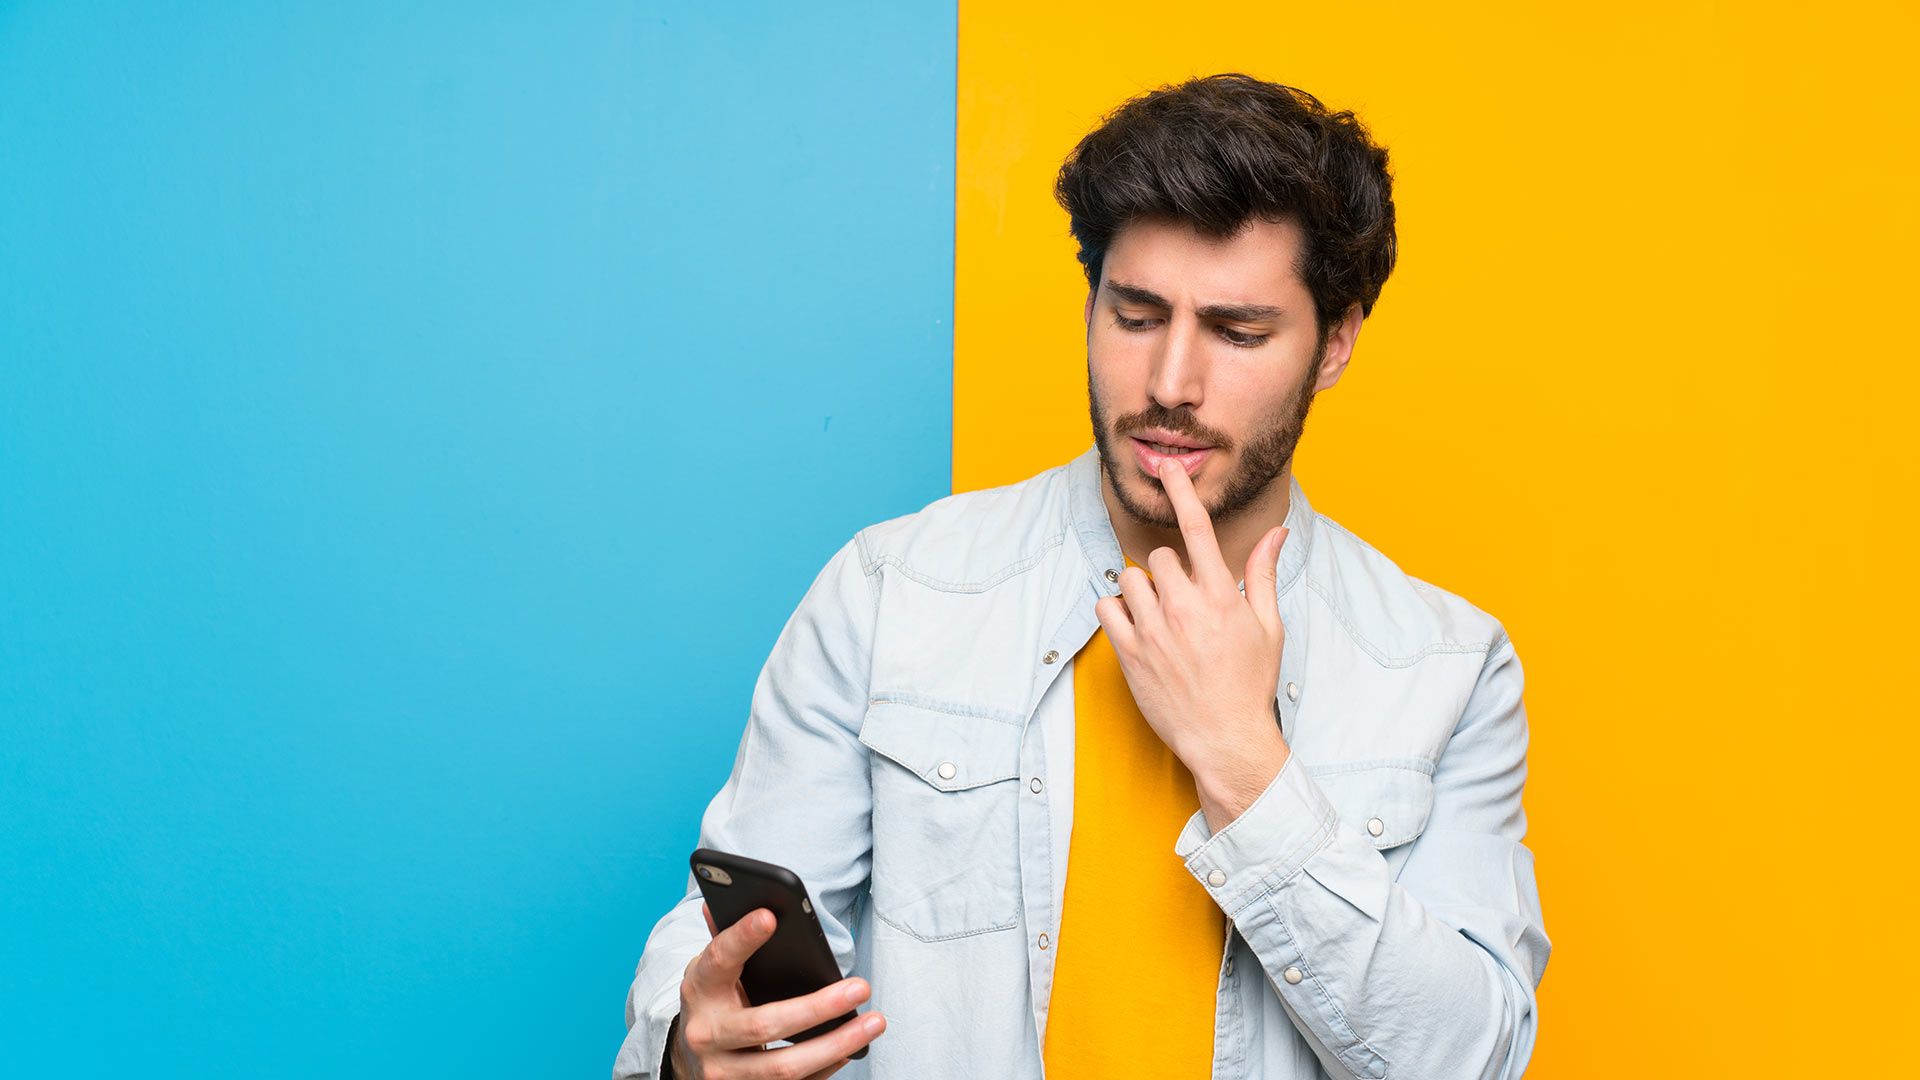 Brunette man wearing a yellow shirt looking at his phone and touching his lower lip. Split blue and yellow background.